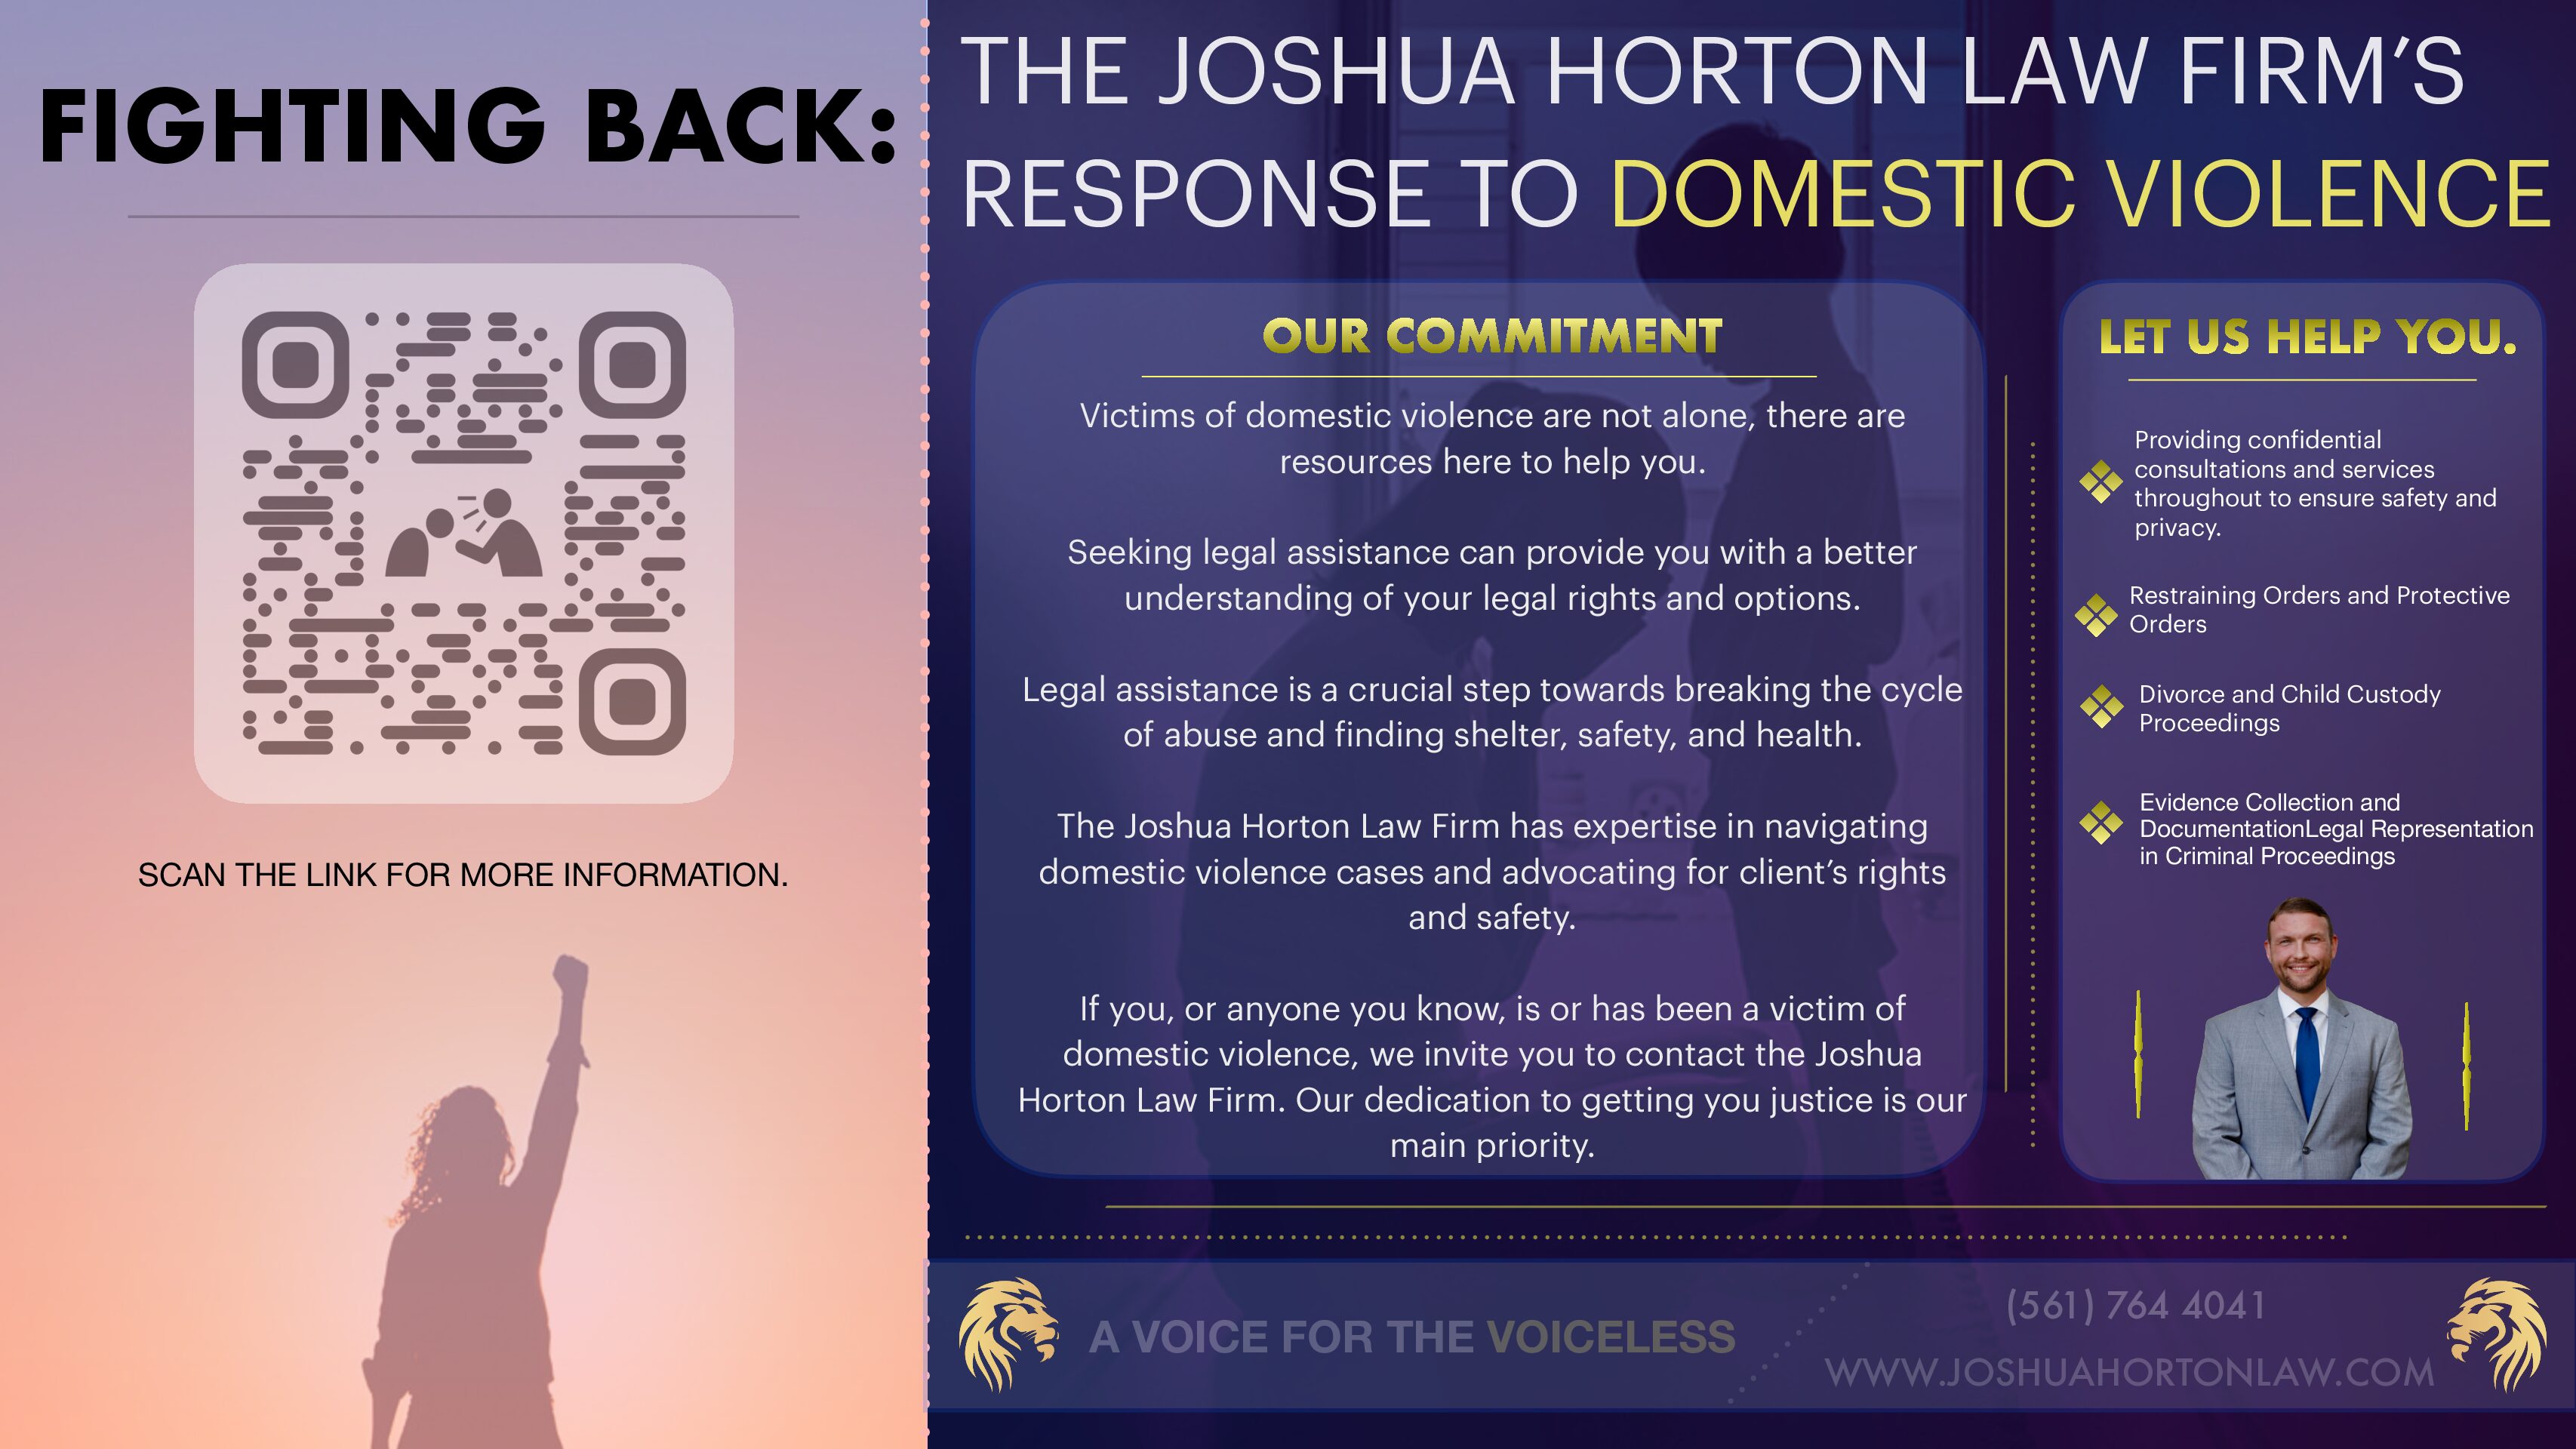 Safeguarding Your Rights: The Joshua Horton Law Firm’s Commitment to Legal Assistance for Domestic Violence Victims